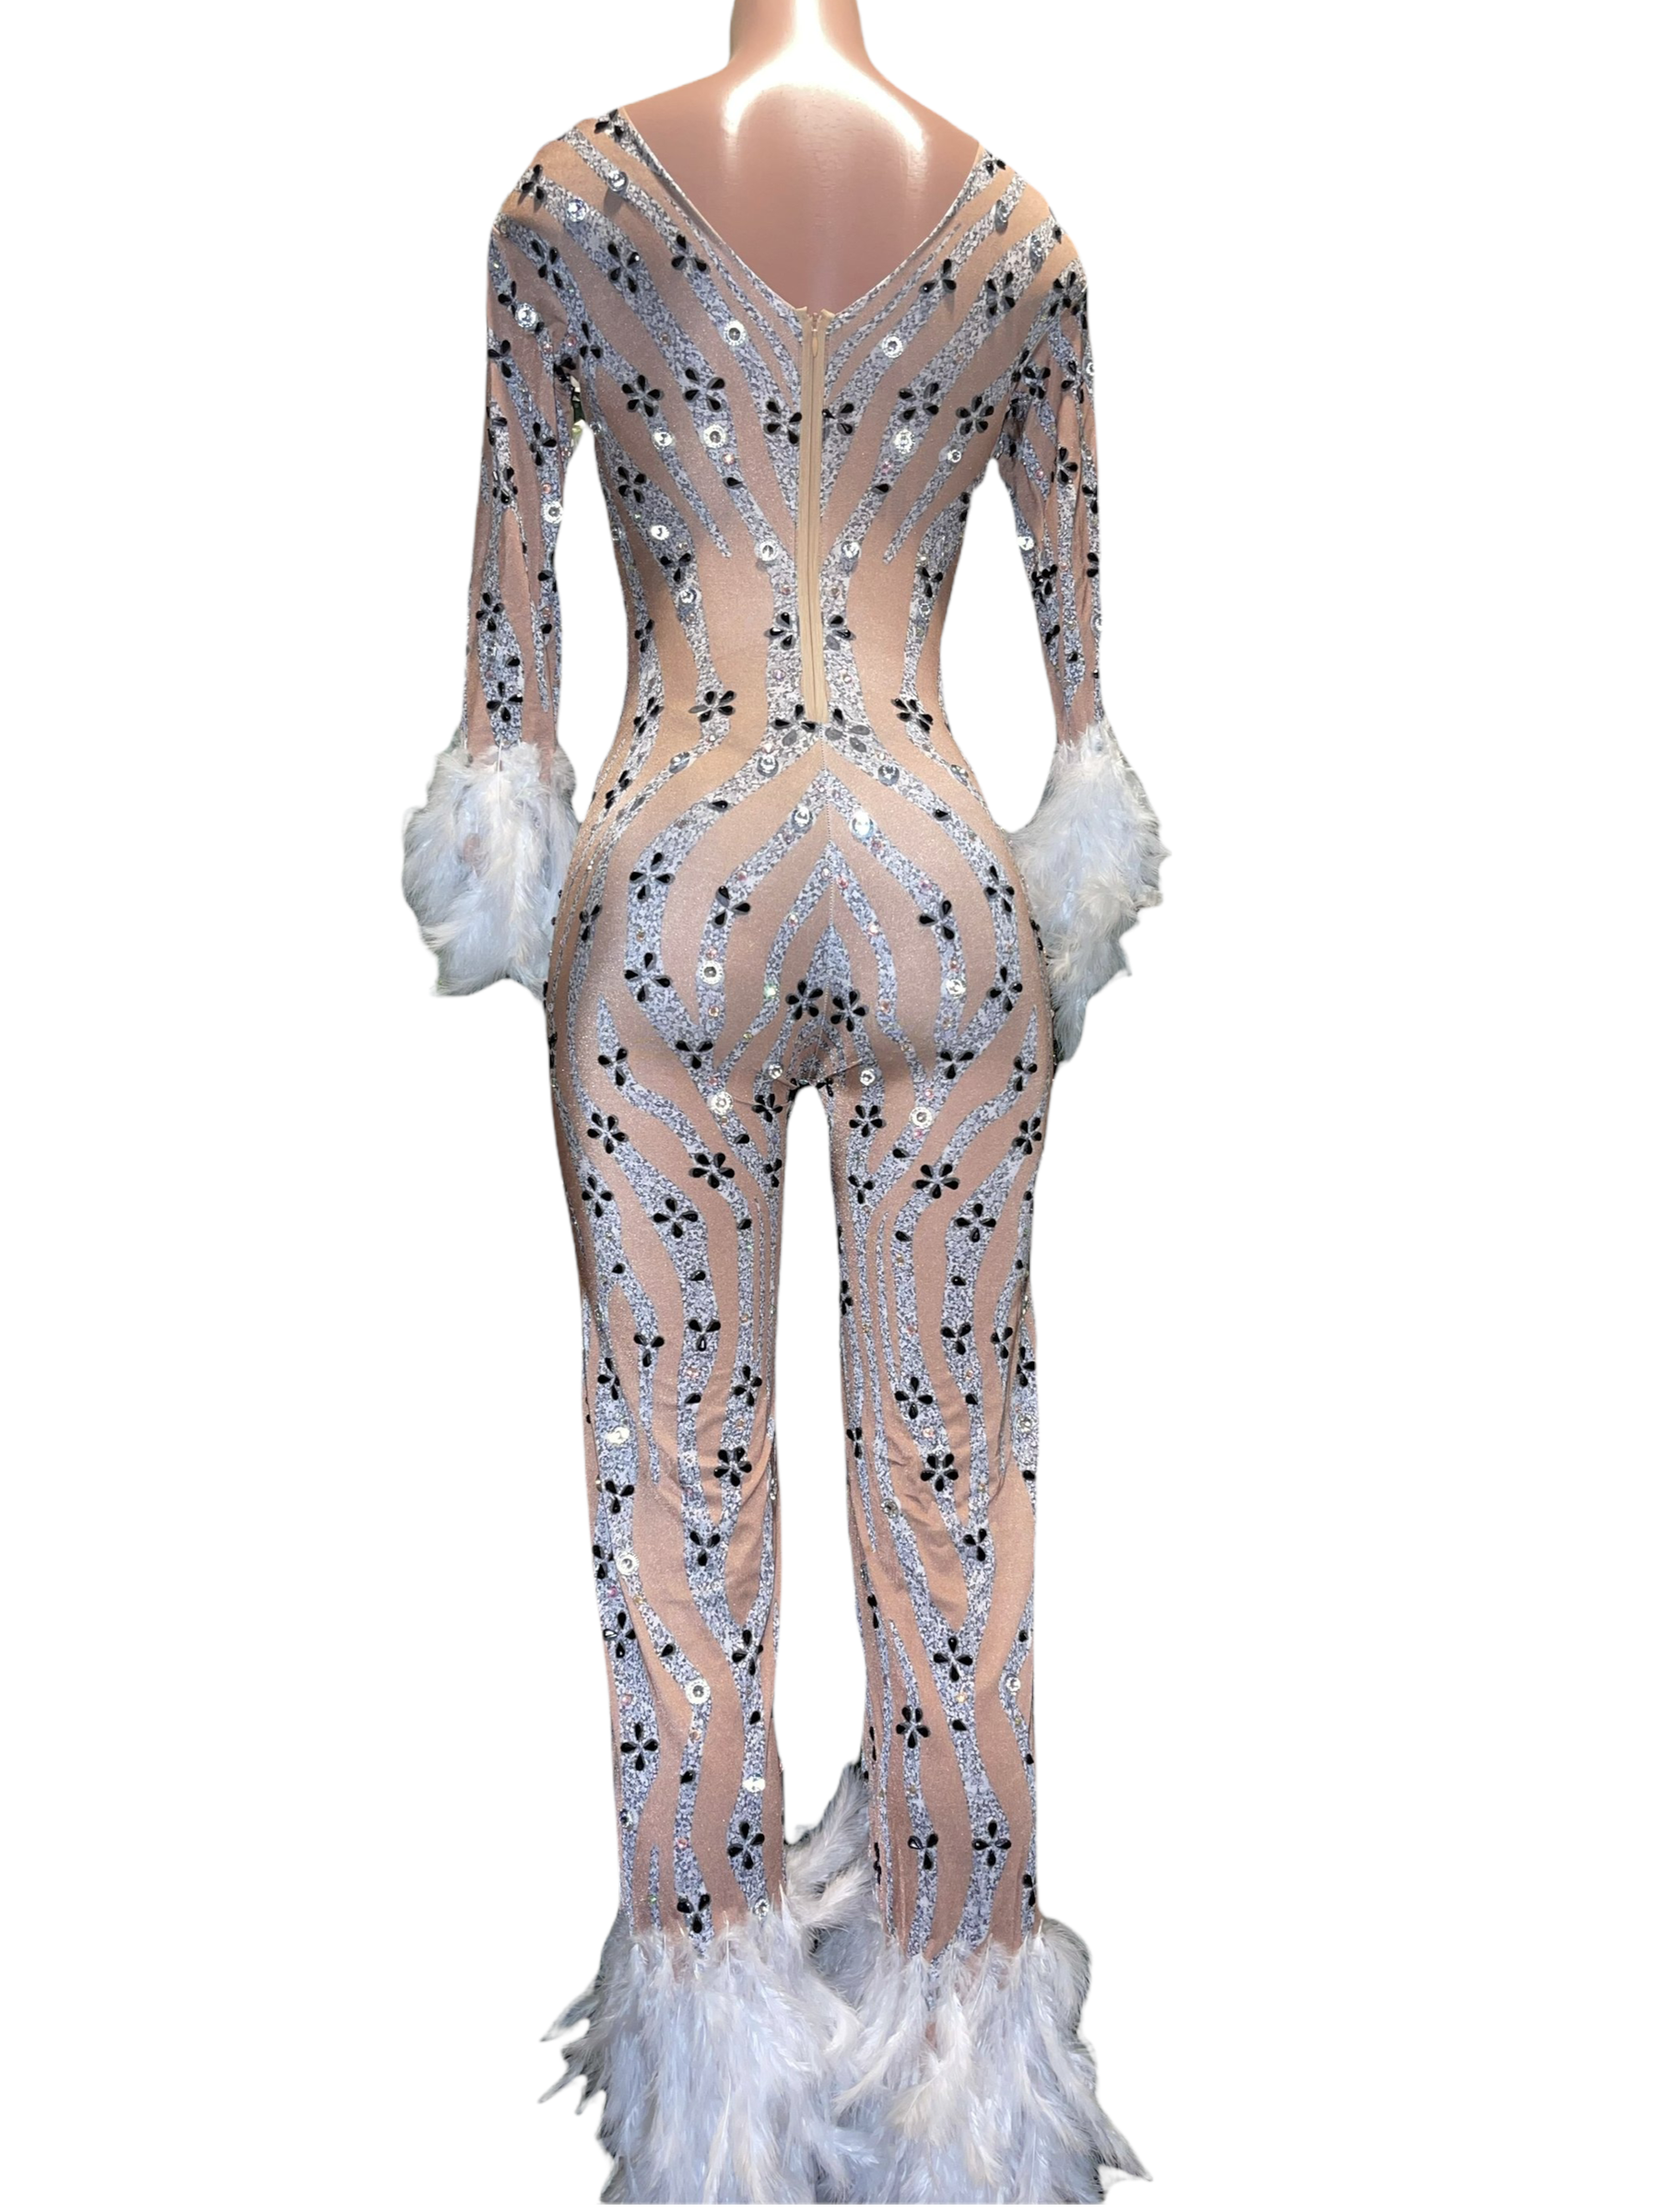 AINT PLAYING GAMES EMBELLISHED BODYSUIT